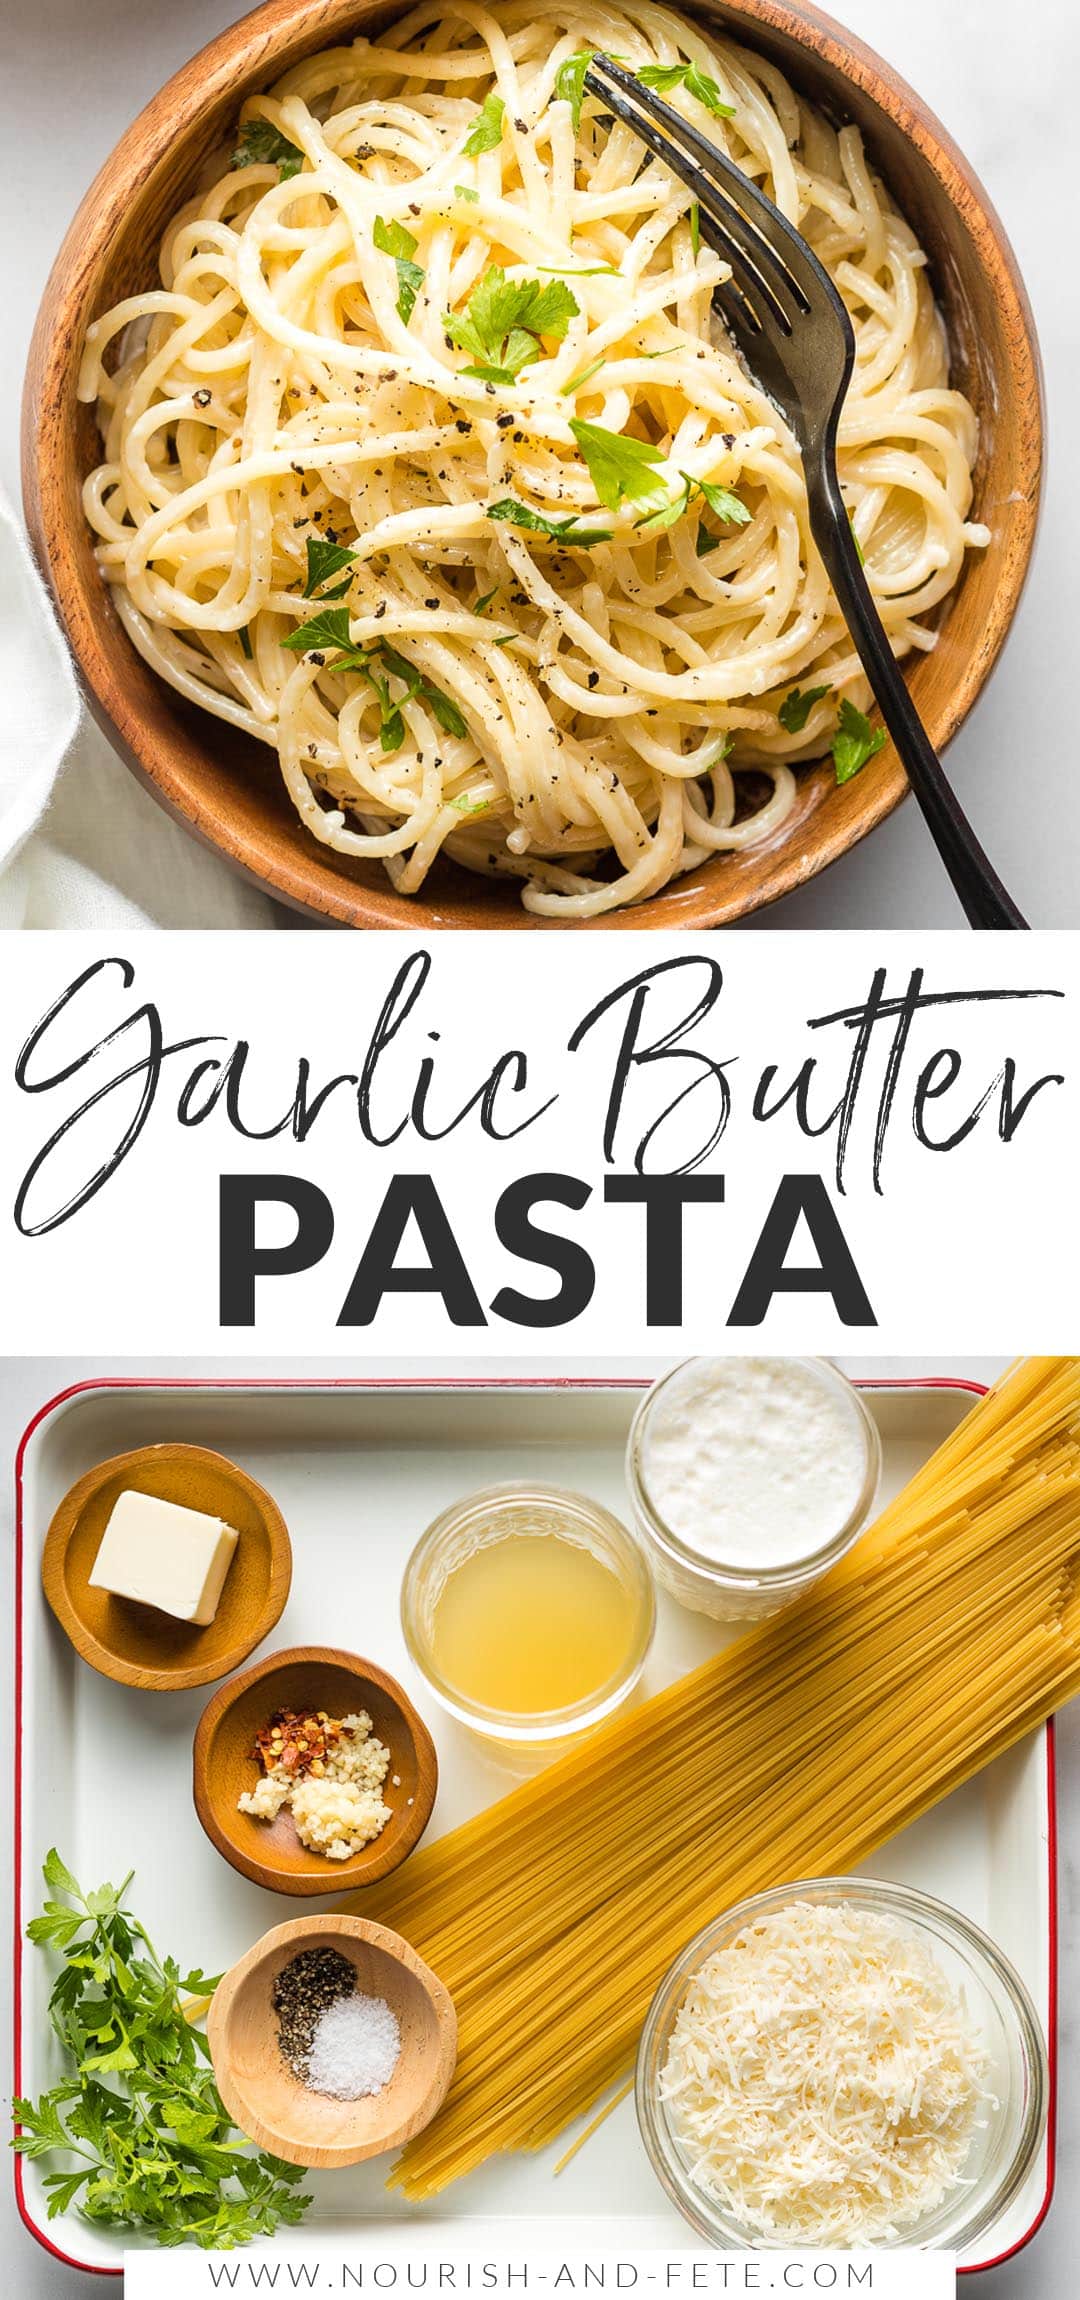 Garlic Butter Pasta (15 Minutes!) - Nourish and Fete